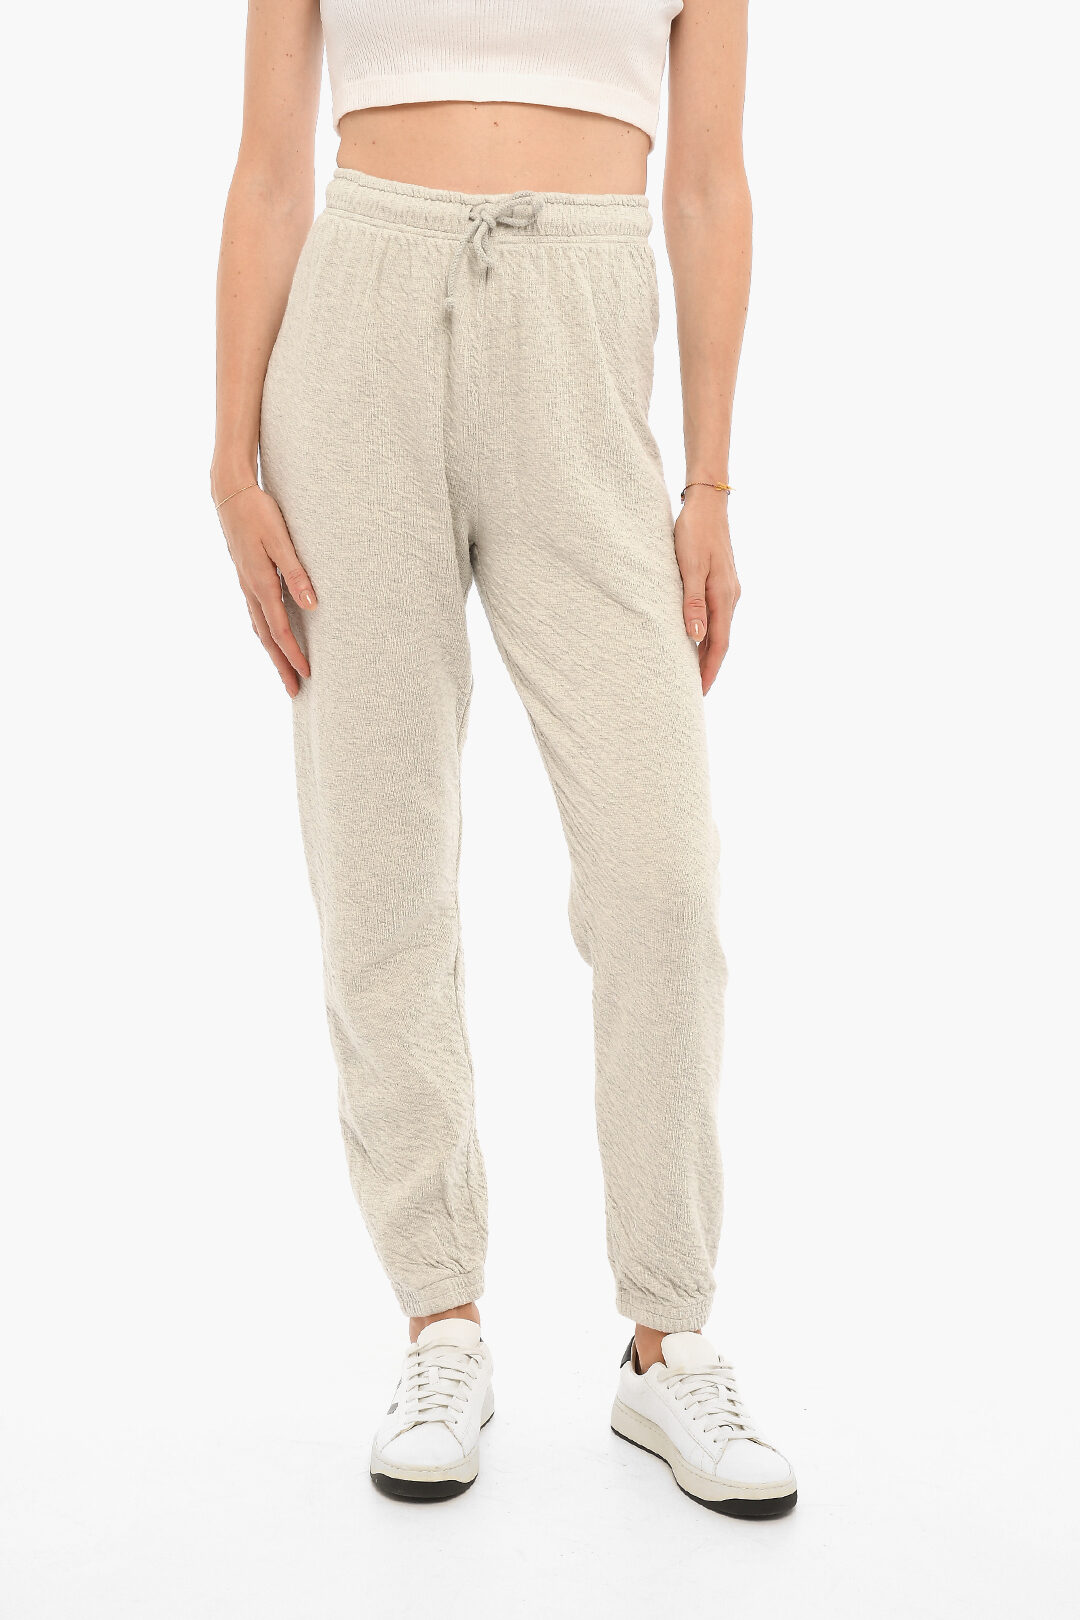 American Vintage High-Waisted Cotton Joggers women - Glamood Outlet